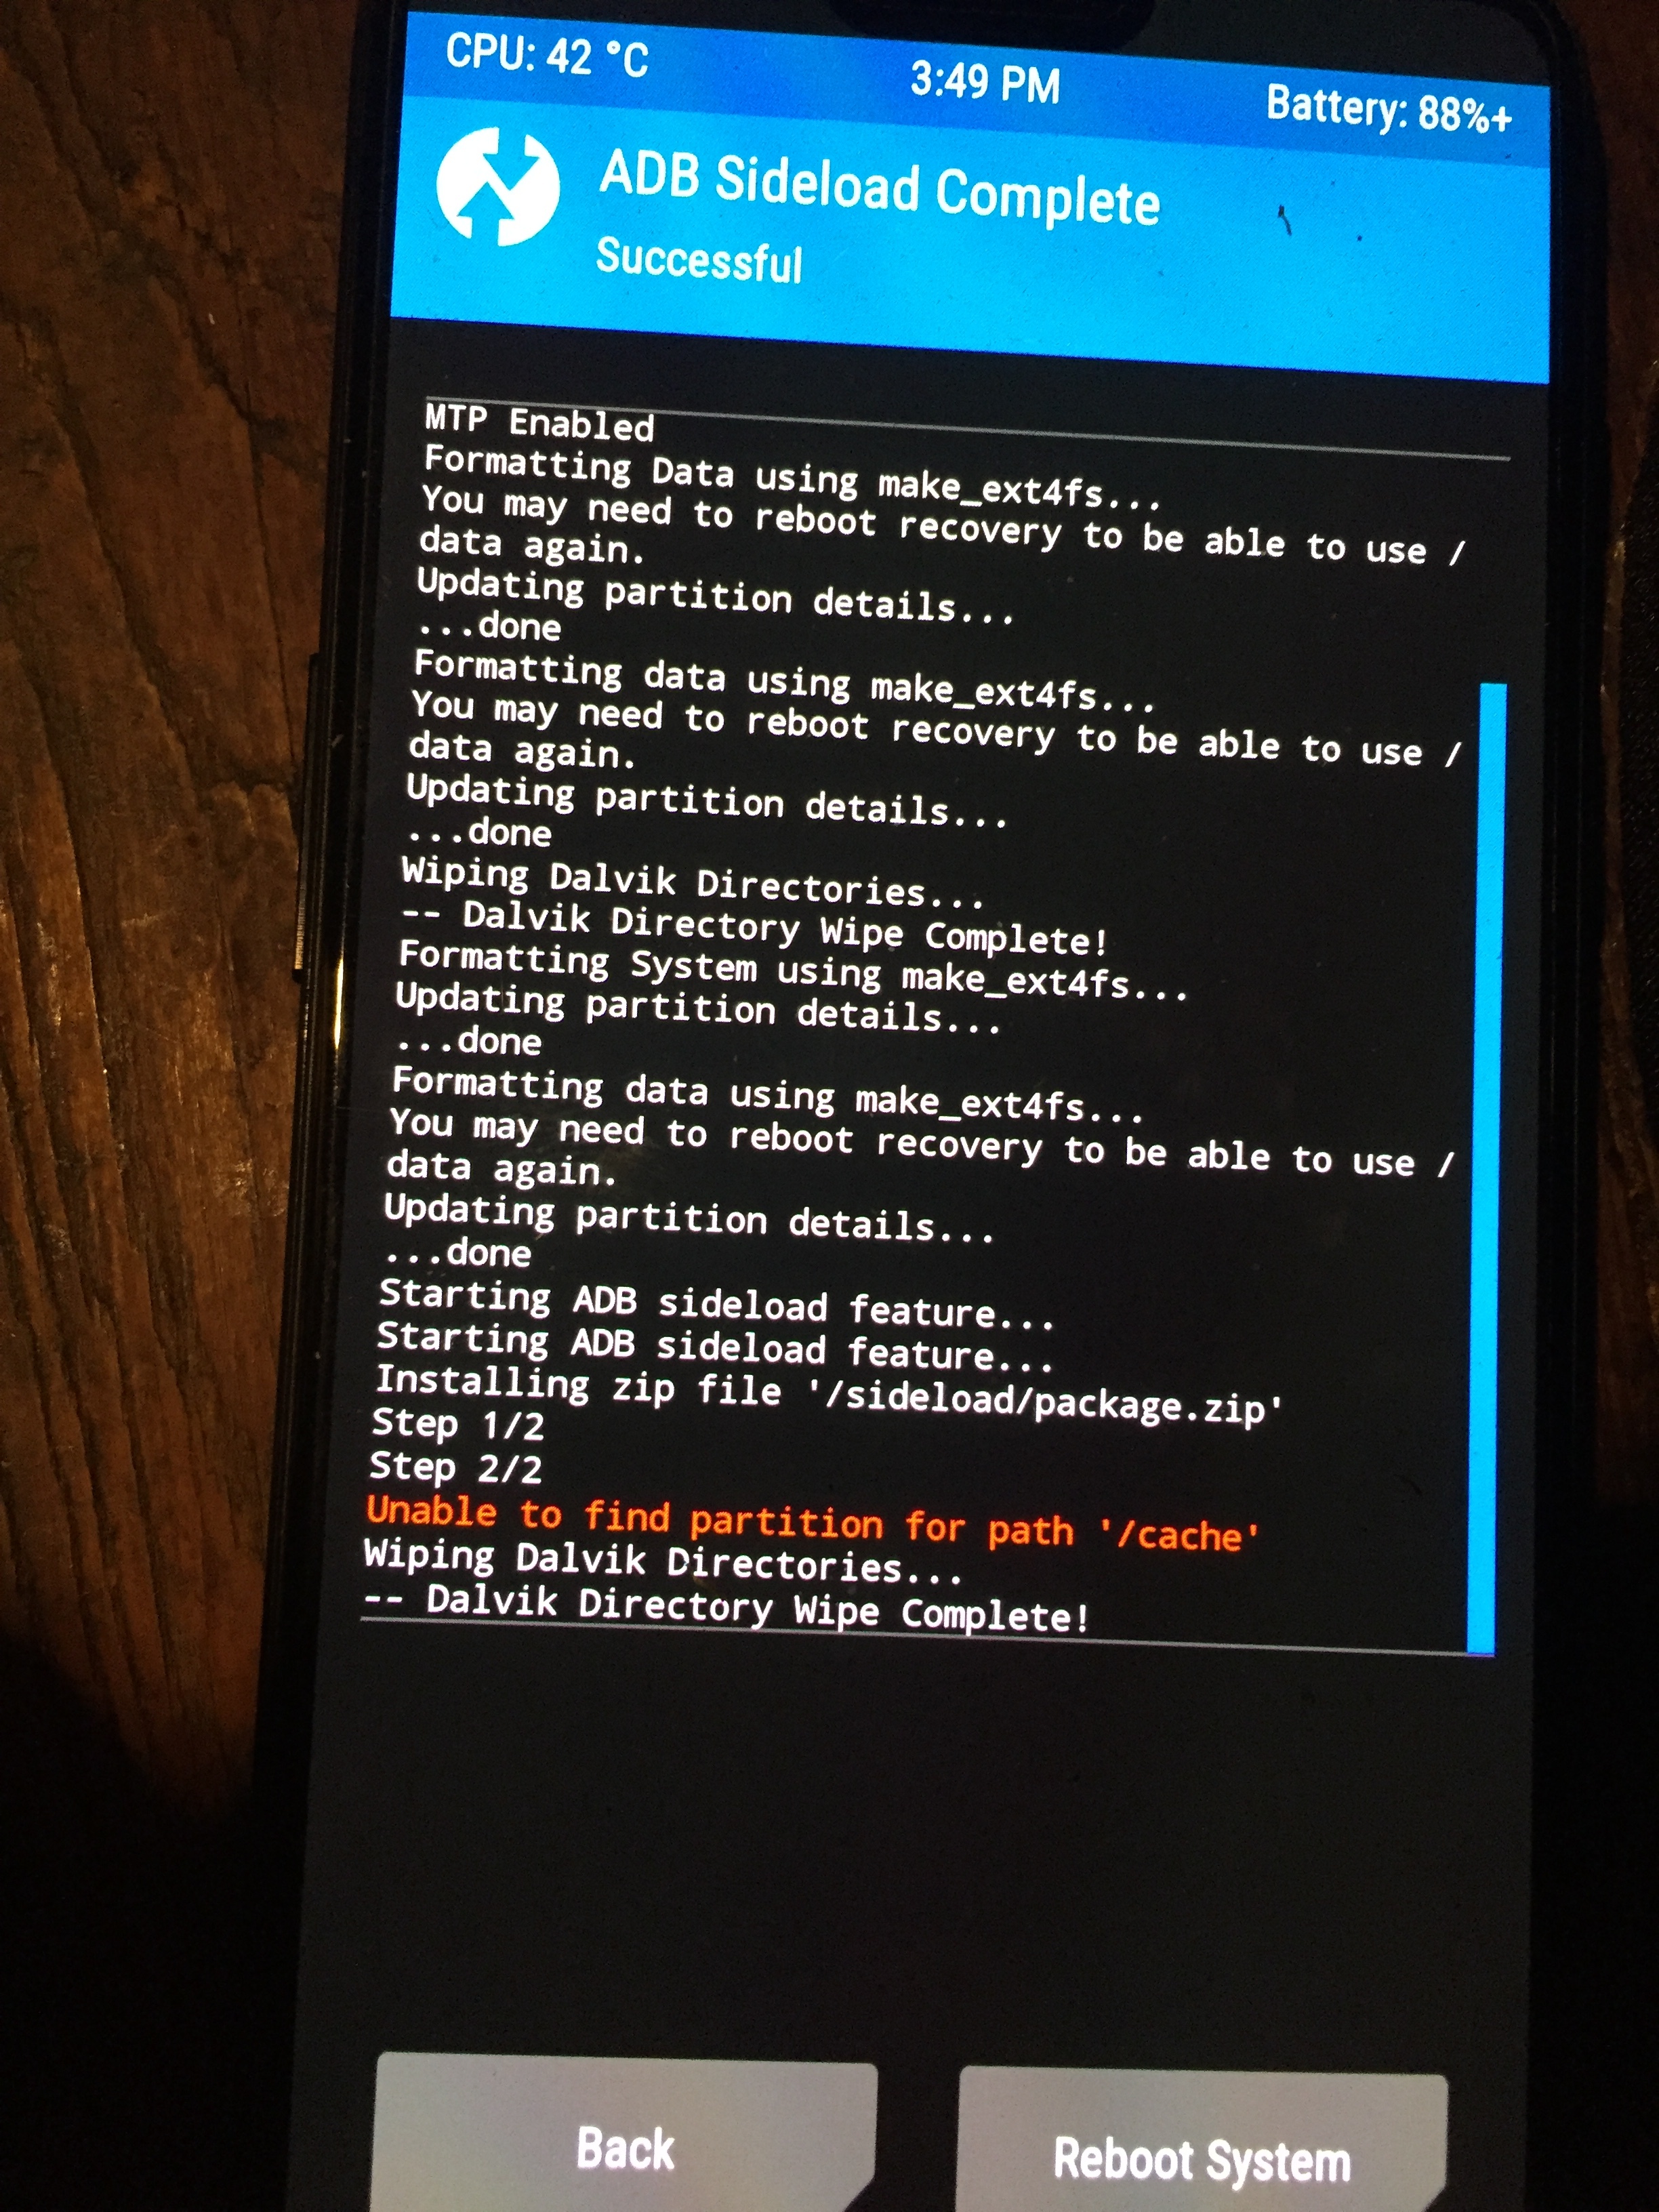 fastboot flash recovery twrp failed data transfer failed